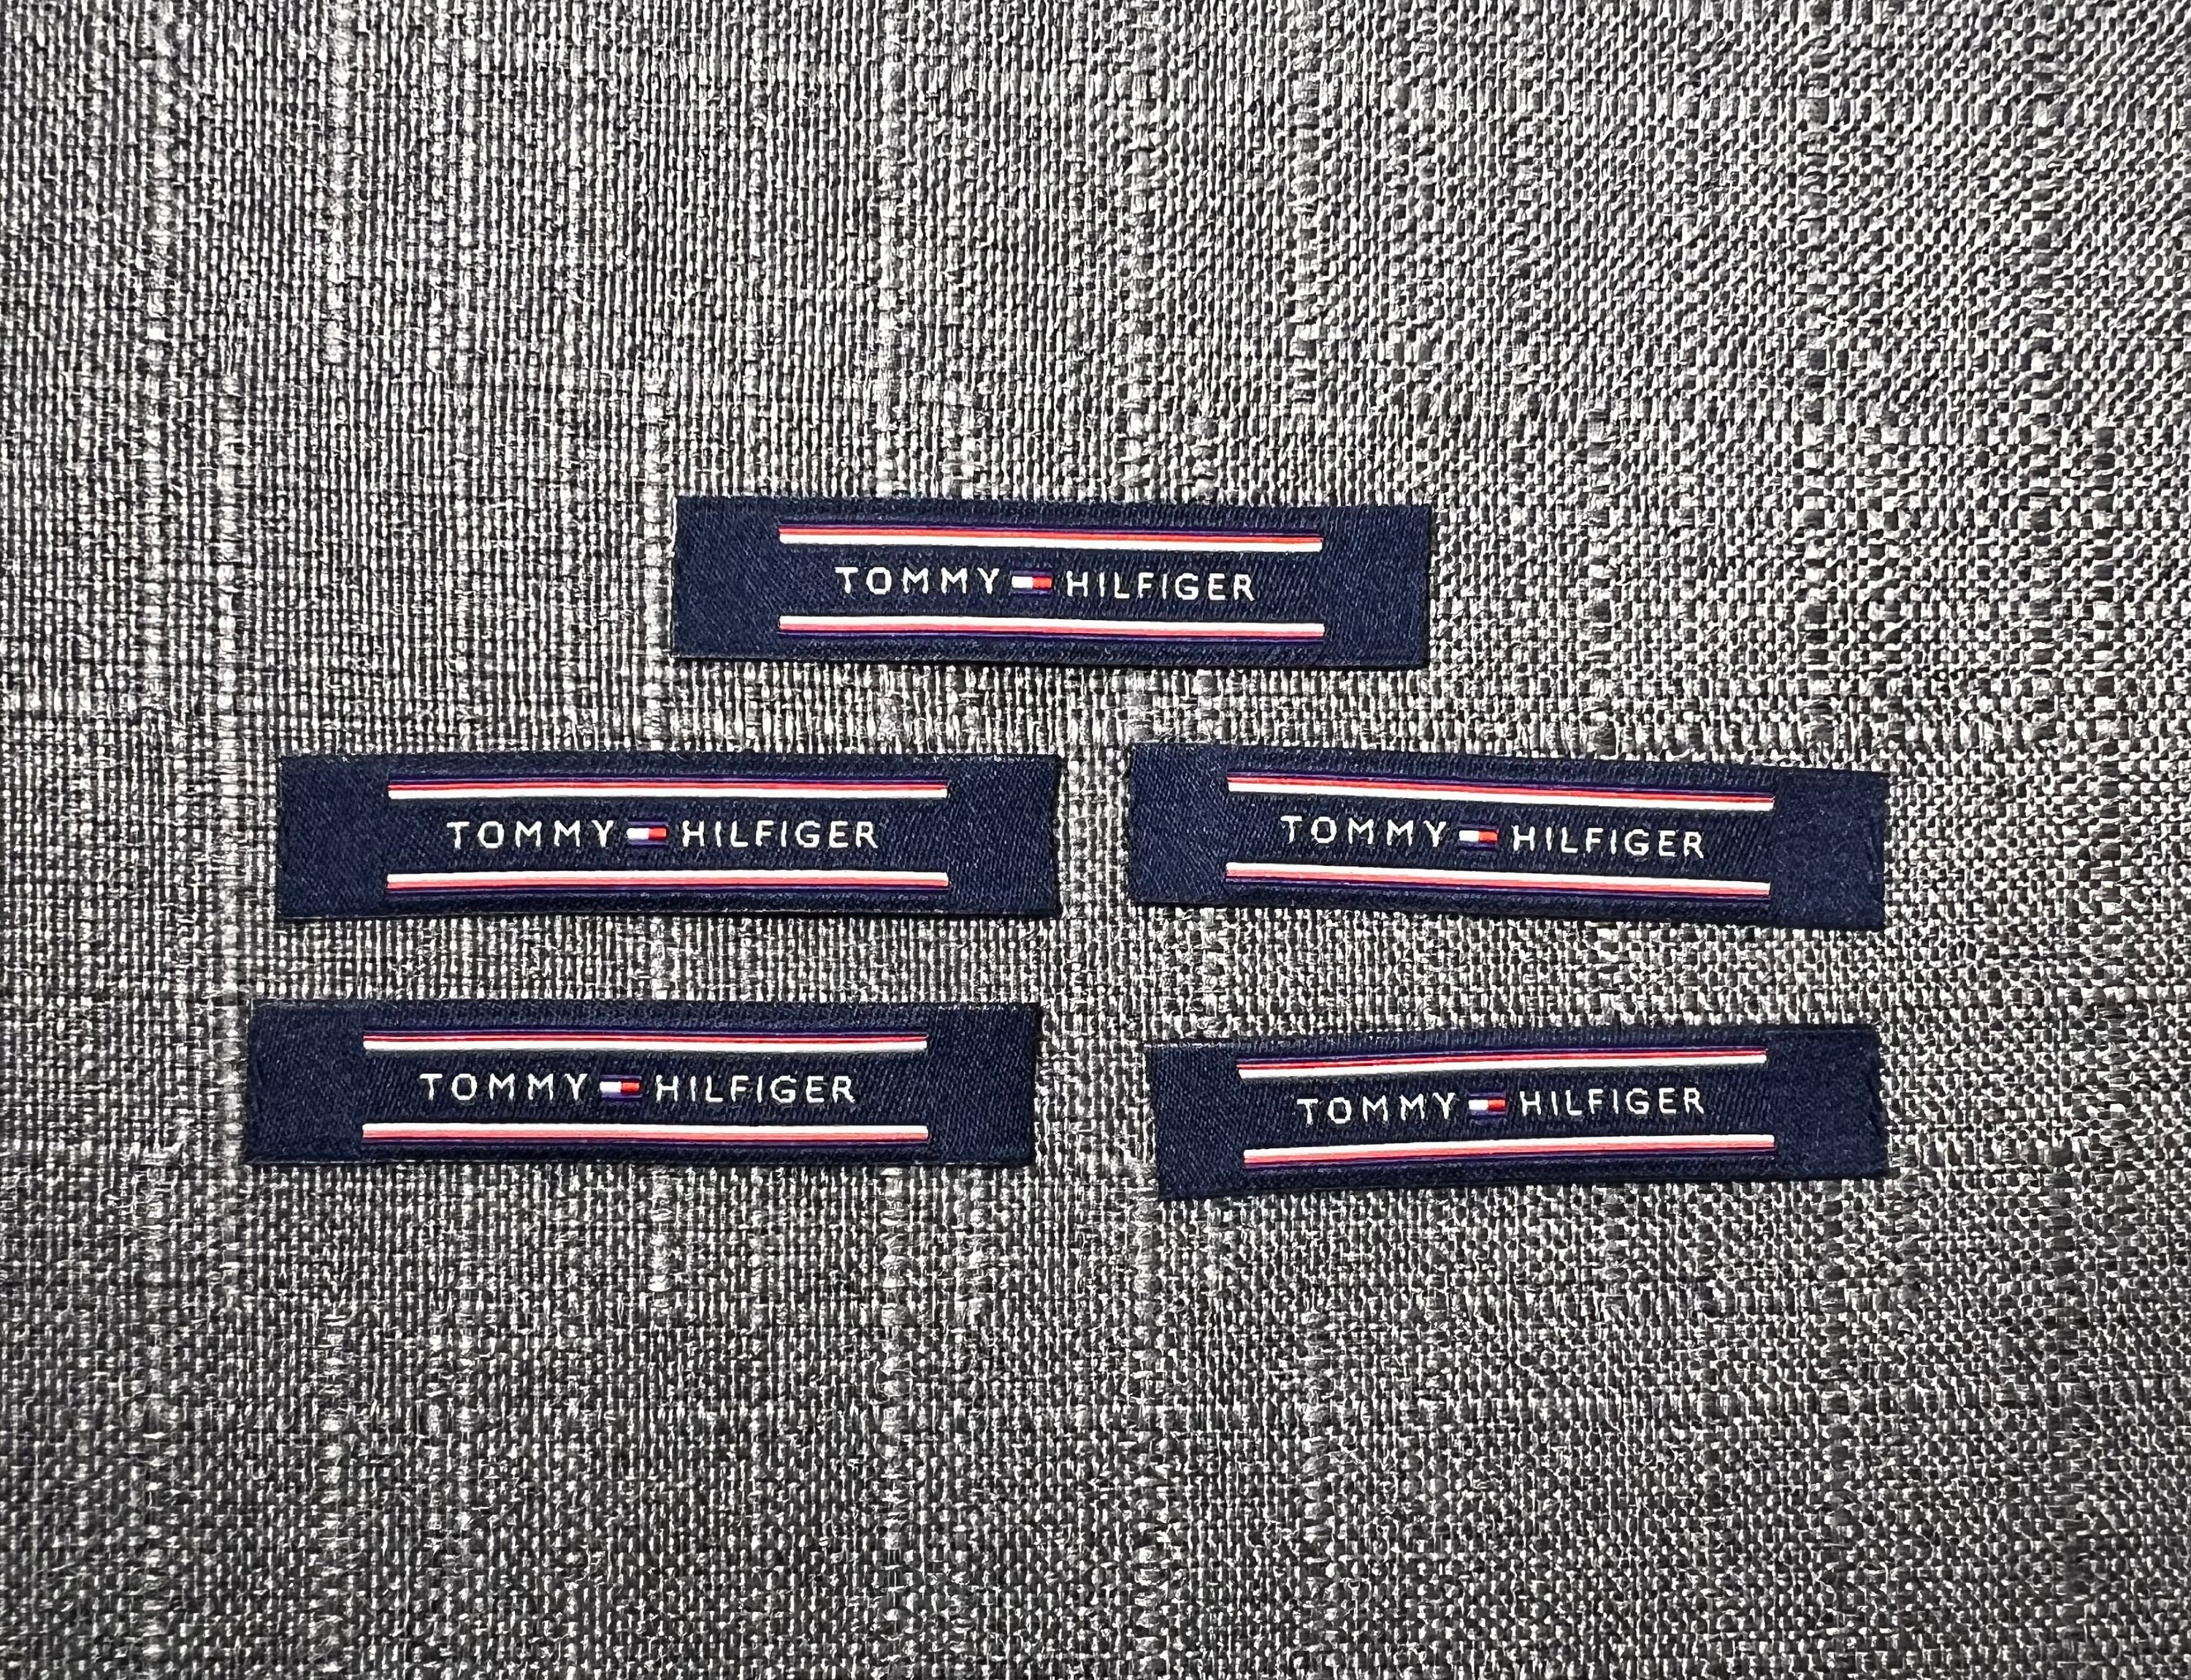 - Labels Hilfiger Etsy Brand Sewing Jeans Tommy